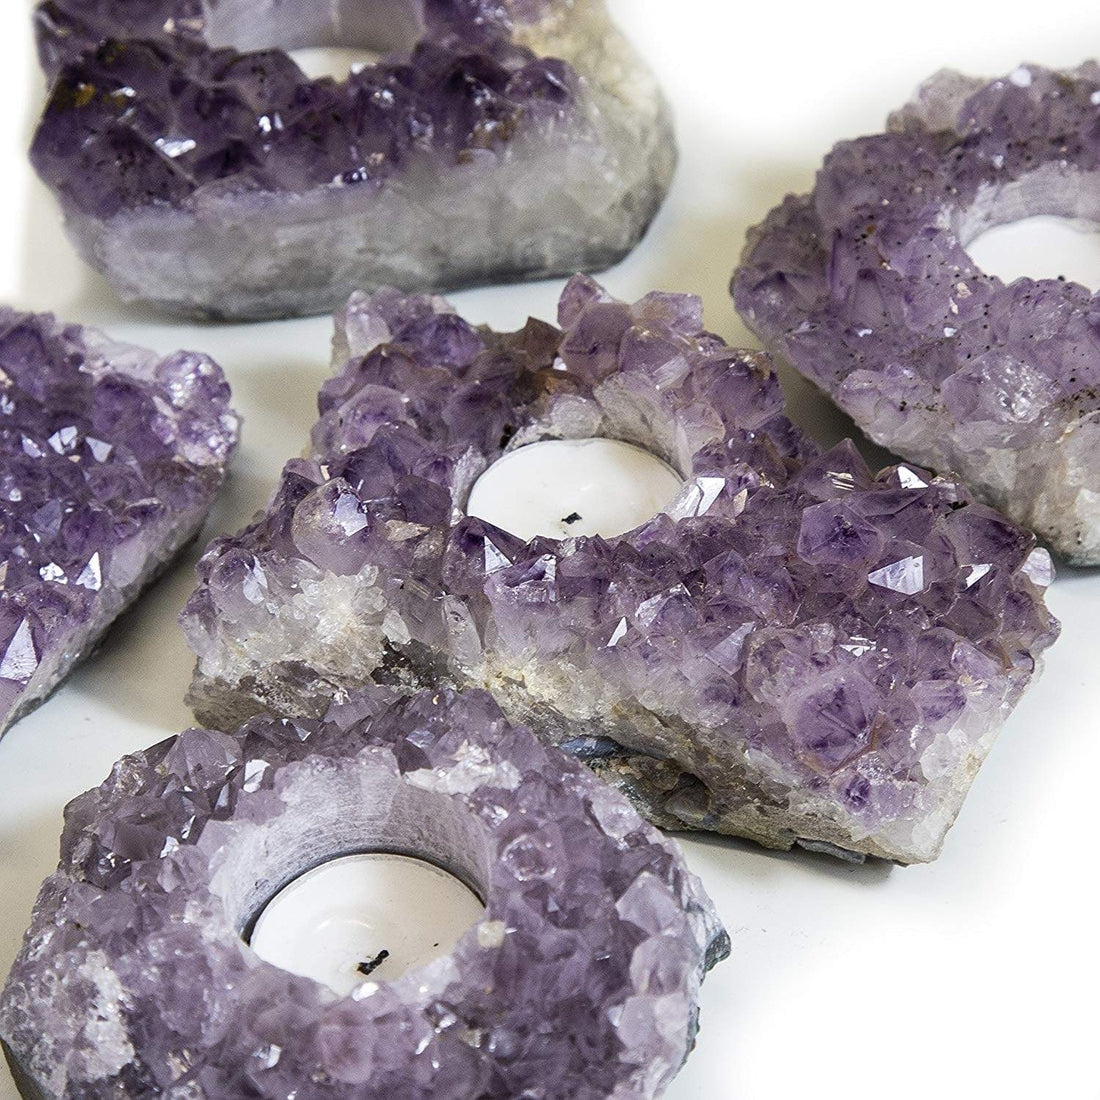 Natural Amethyst Crystal Candle Holders